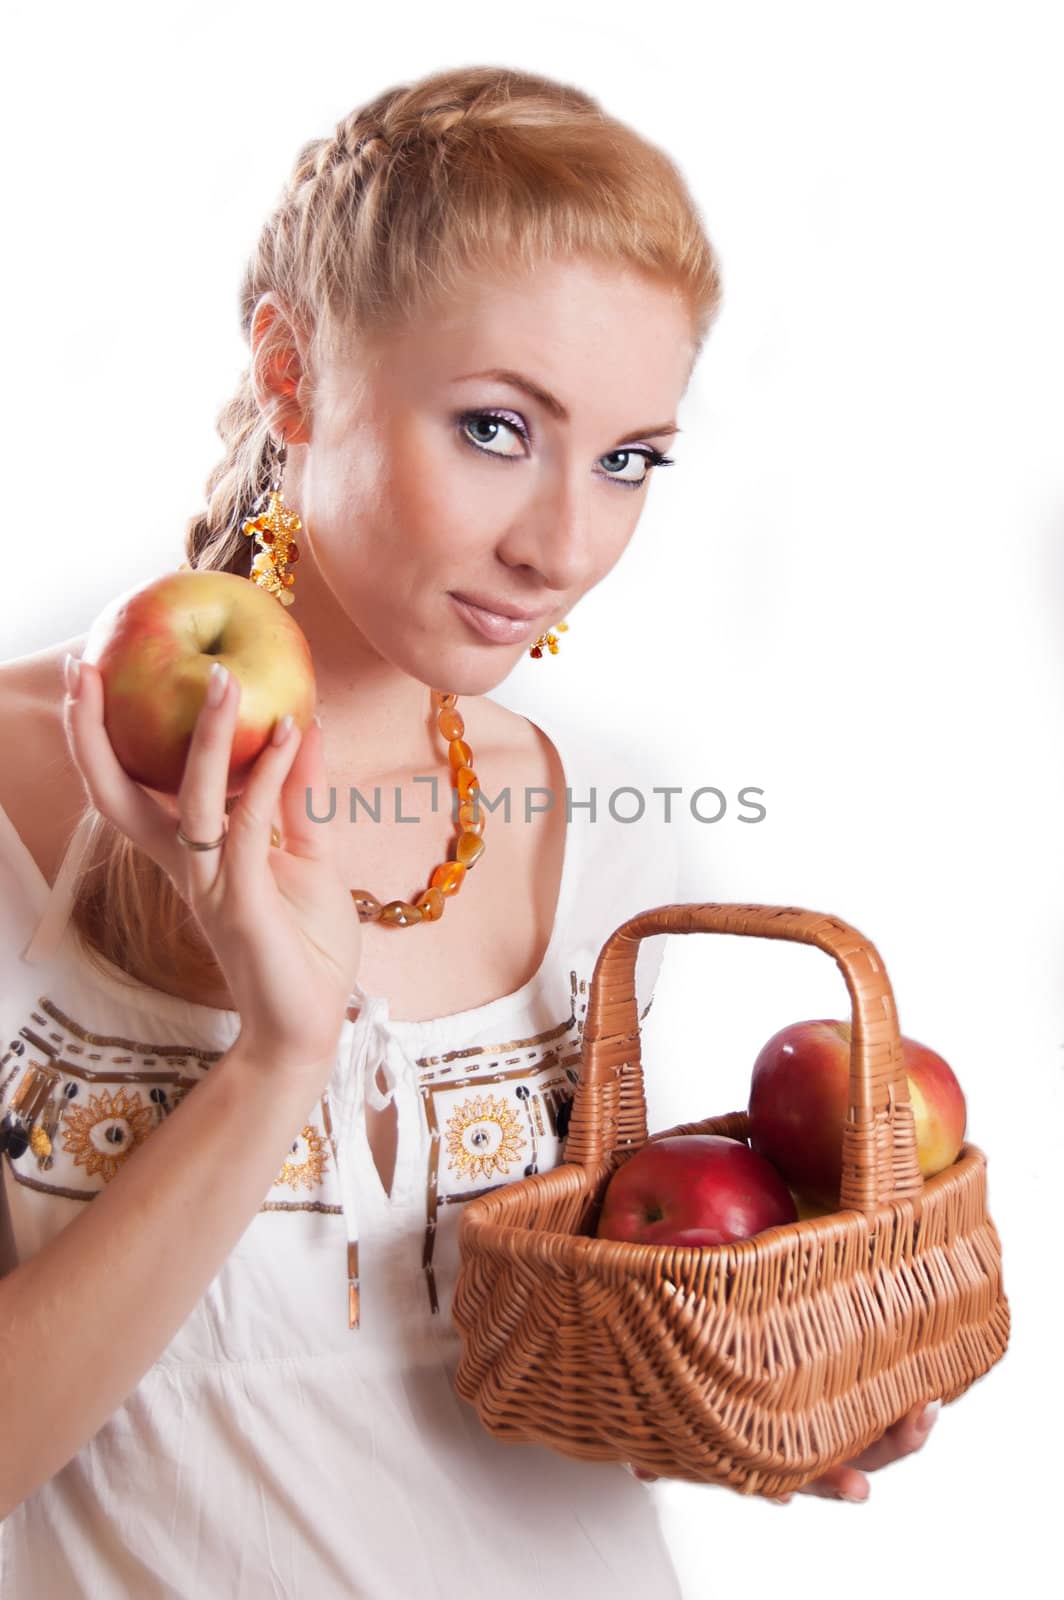 Redheaded woman with basket of apples over white